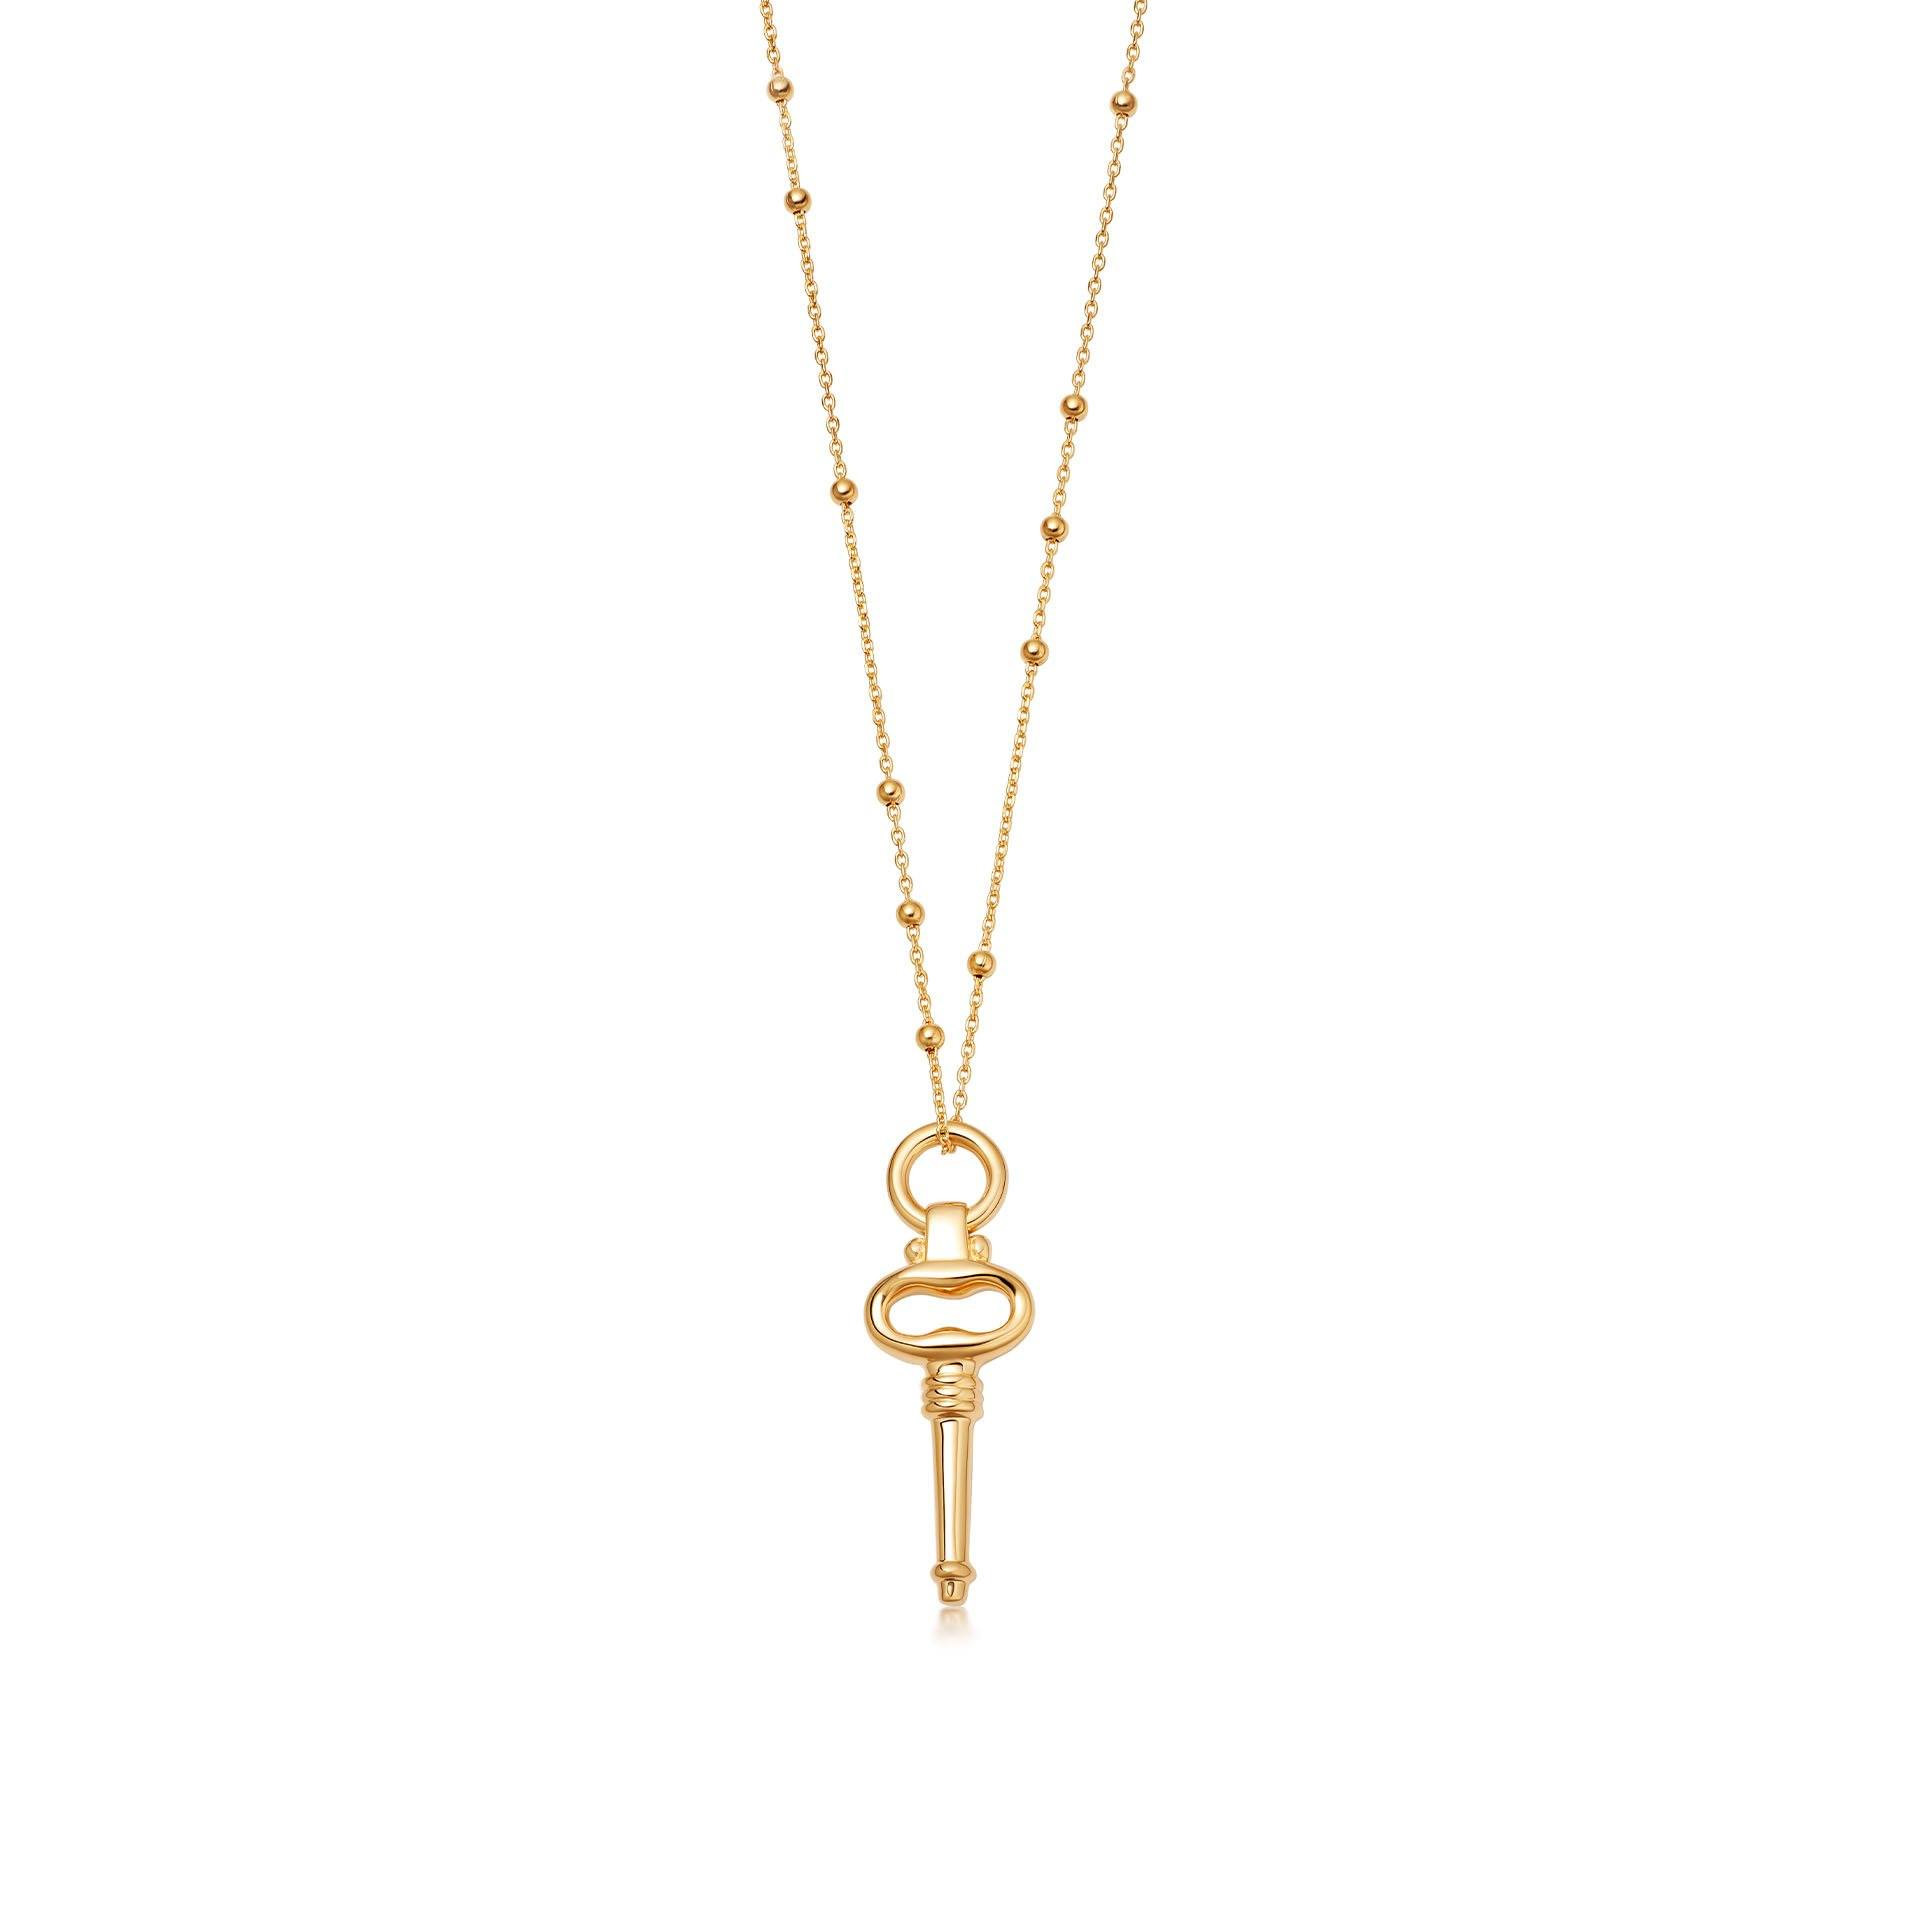 Wholesale Custom engraving OEM/ODM Jewelry Chain in18ct Gold Vermeil on Sterling Silver Pendant in 18ct Gold Plated On Brass